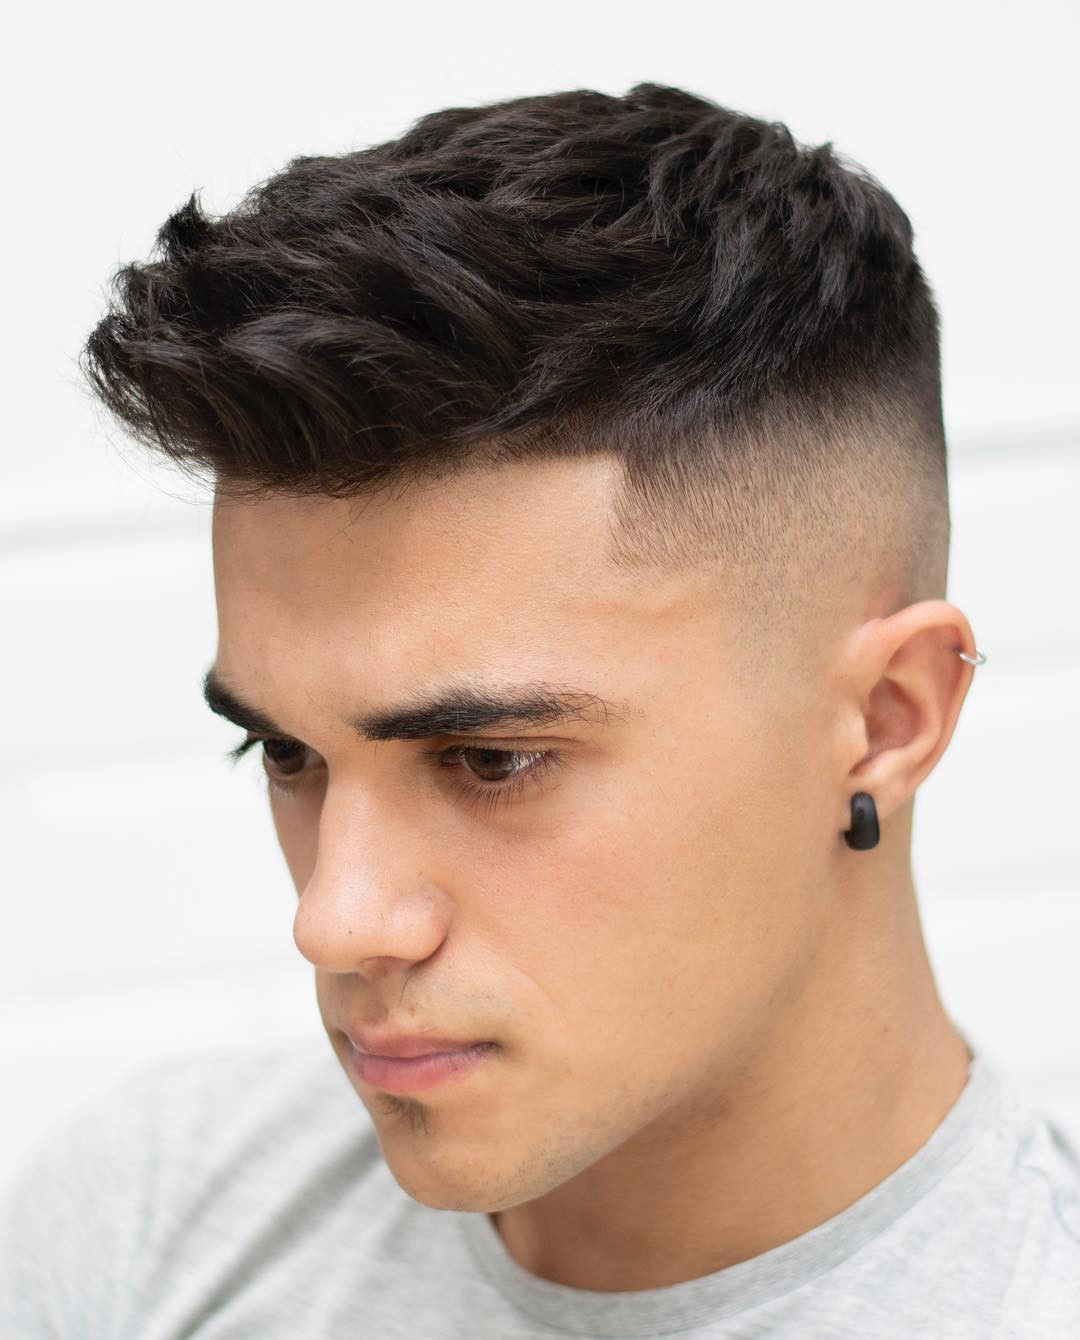 Cool Boys Hairstyles 2020
 15 Teen Boy Haircuts That Are Super Cool Stylish For 2020